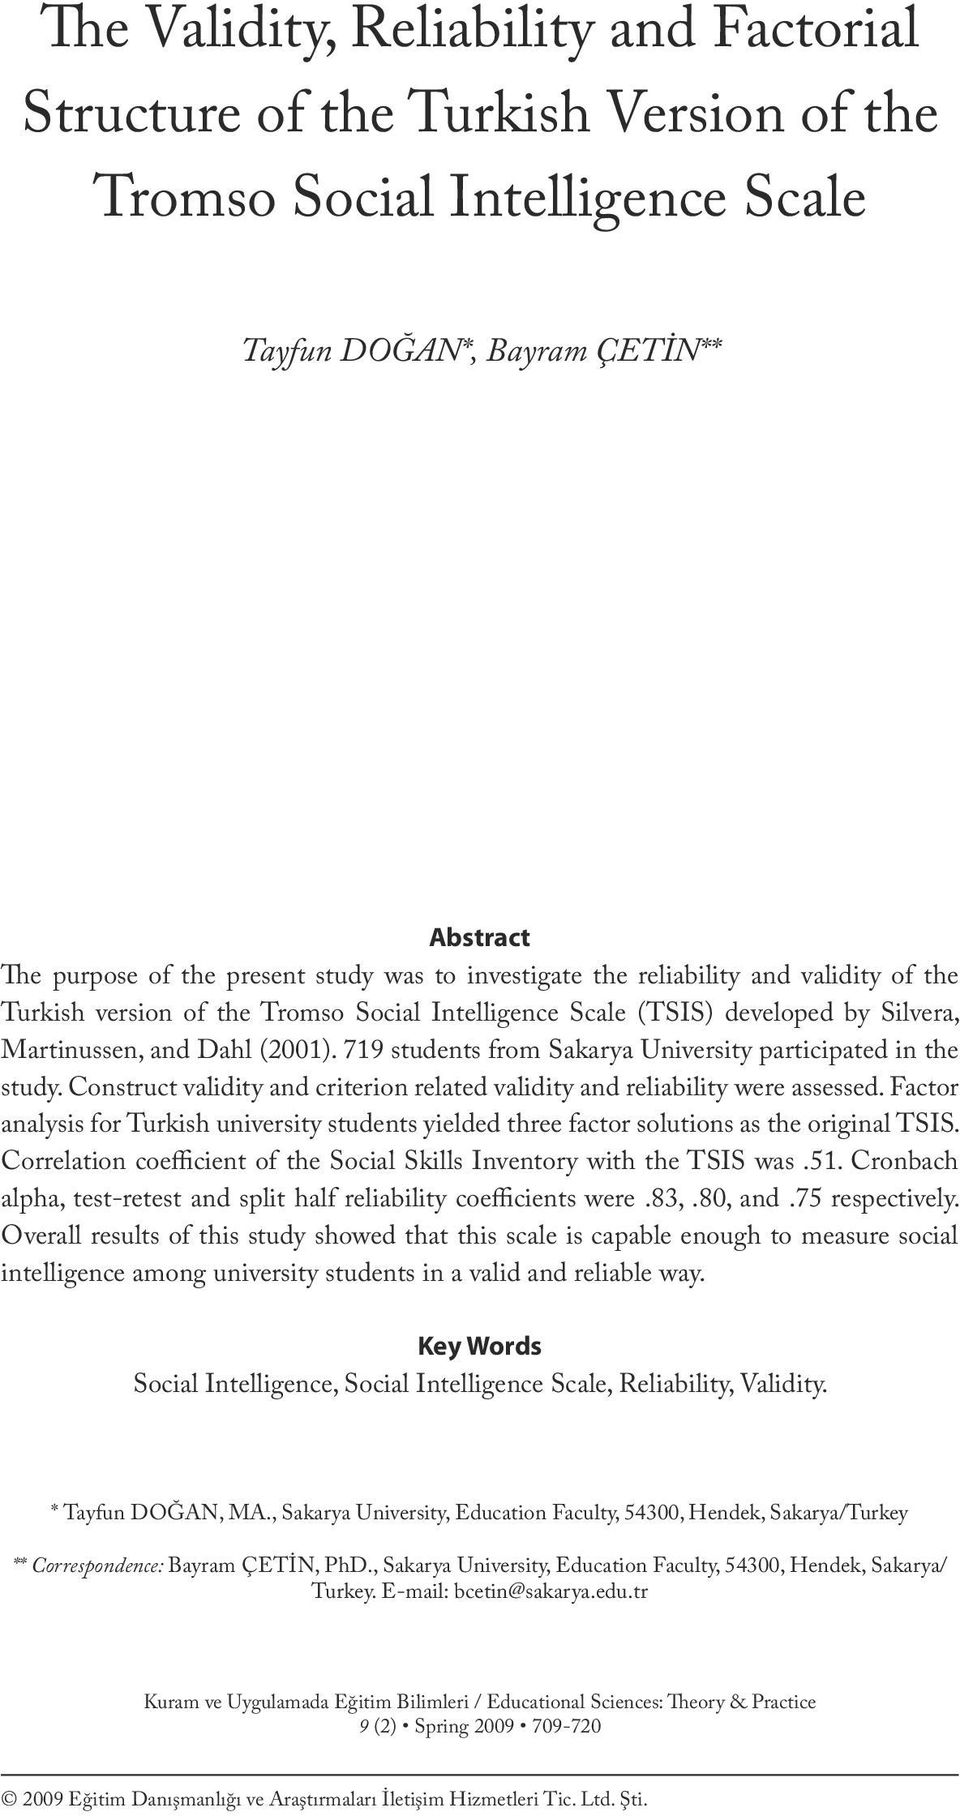 investigate the reliability and validity of the Turkish version of the Tromso Social Intelligence Scale (TSIS) developed by Silvera, Martinussen, and Dahl (2001).